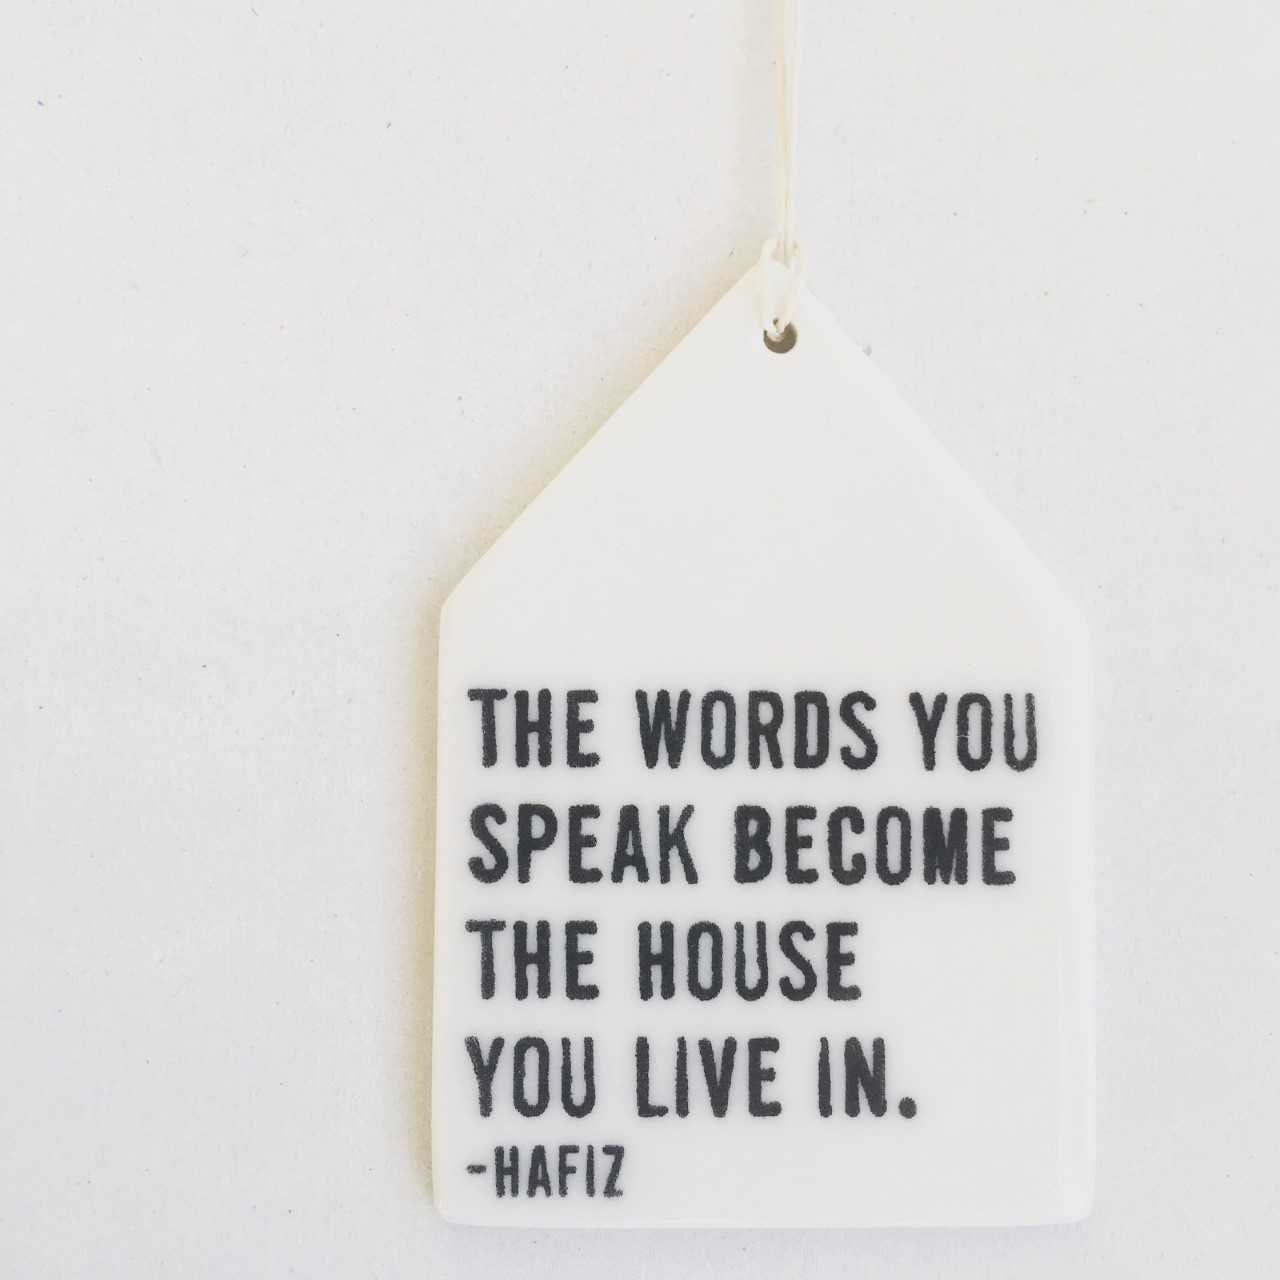 hafiz wall hanging | hafiz quote | hafez quote | ceramic wall tag | screenprinted ceramics | meaningful gift | parenting | daily reminder